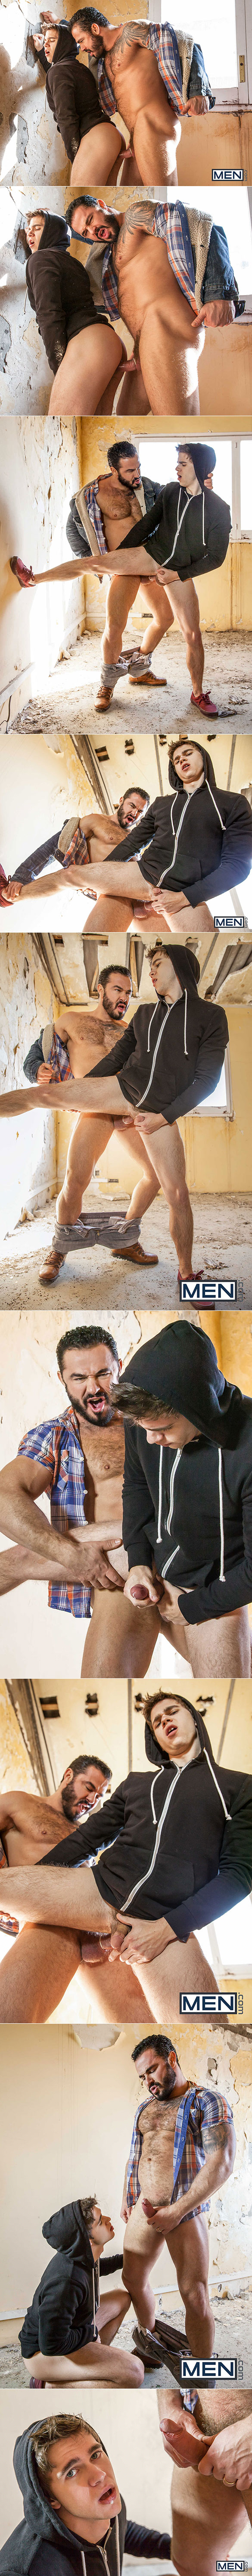 Men.com: Jessy Ares pounds Will Braun in "Lost Boy, Part 1"